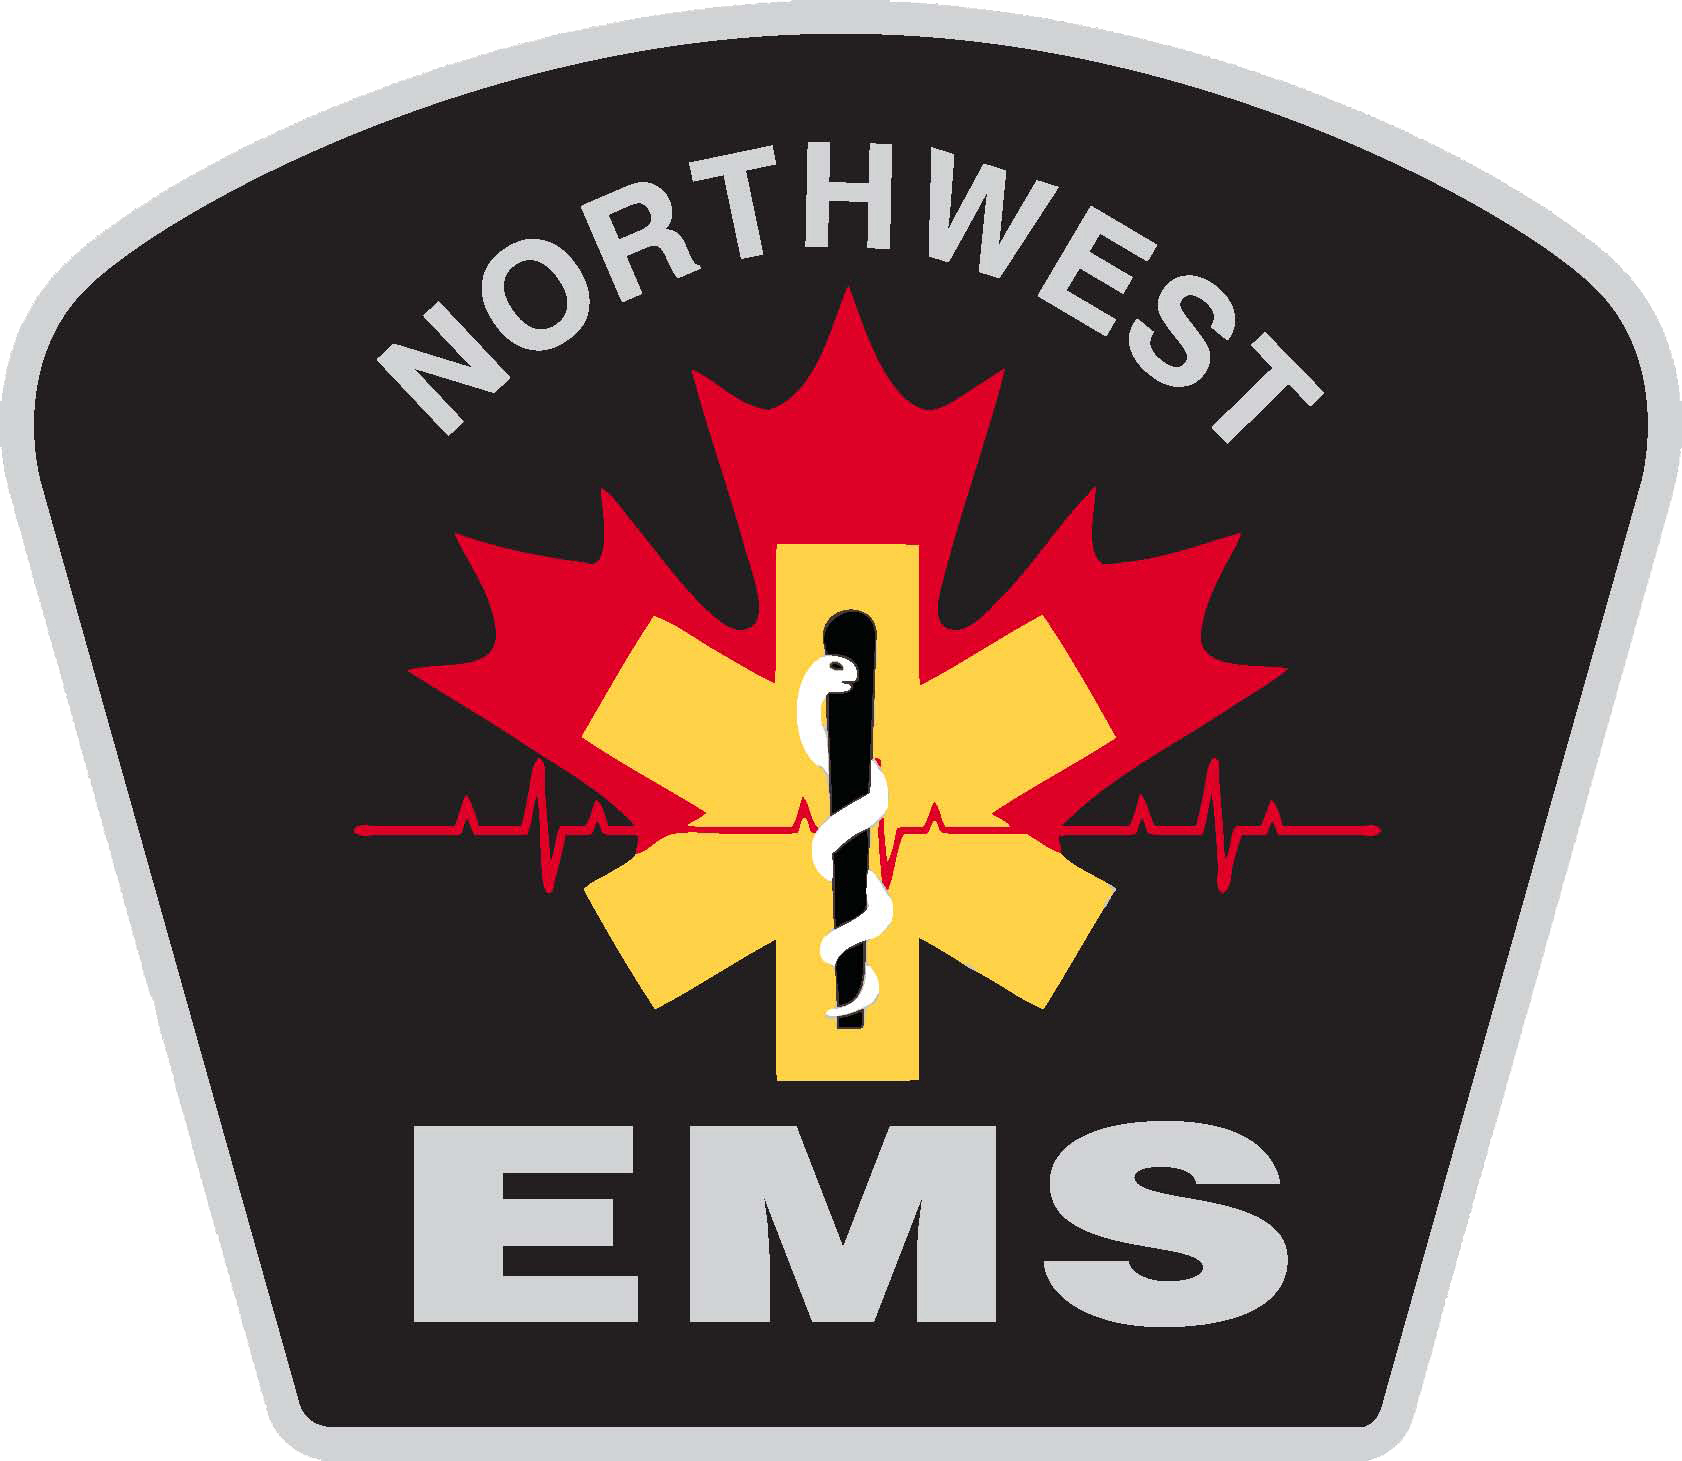 North West EMS